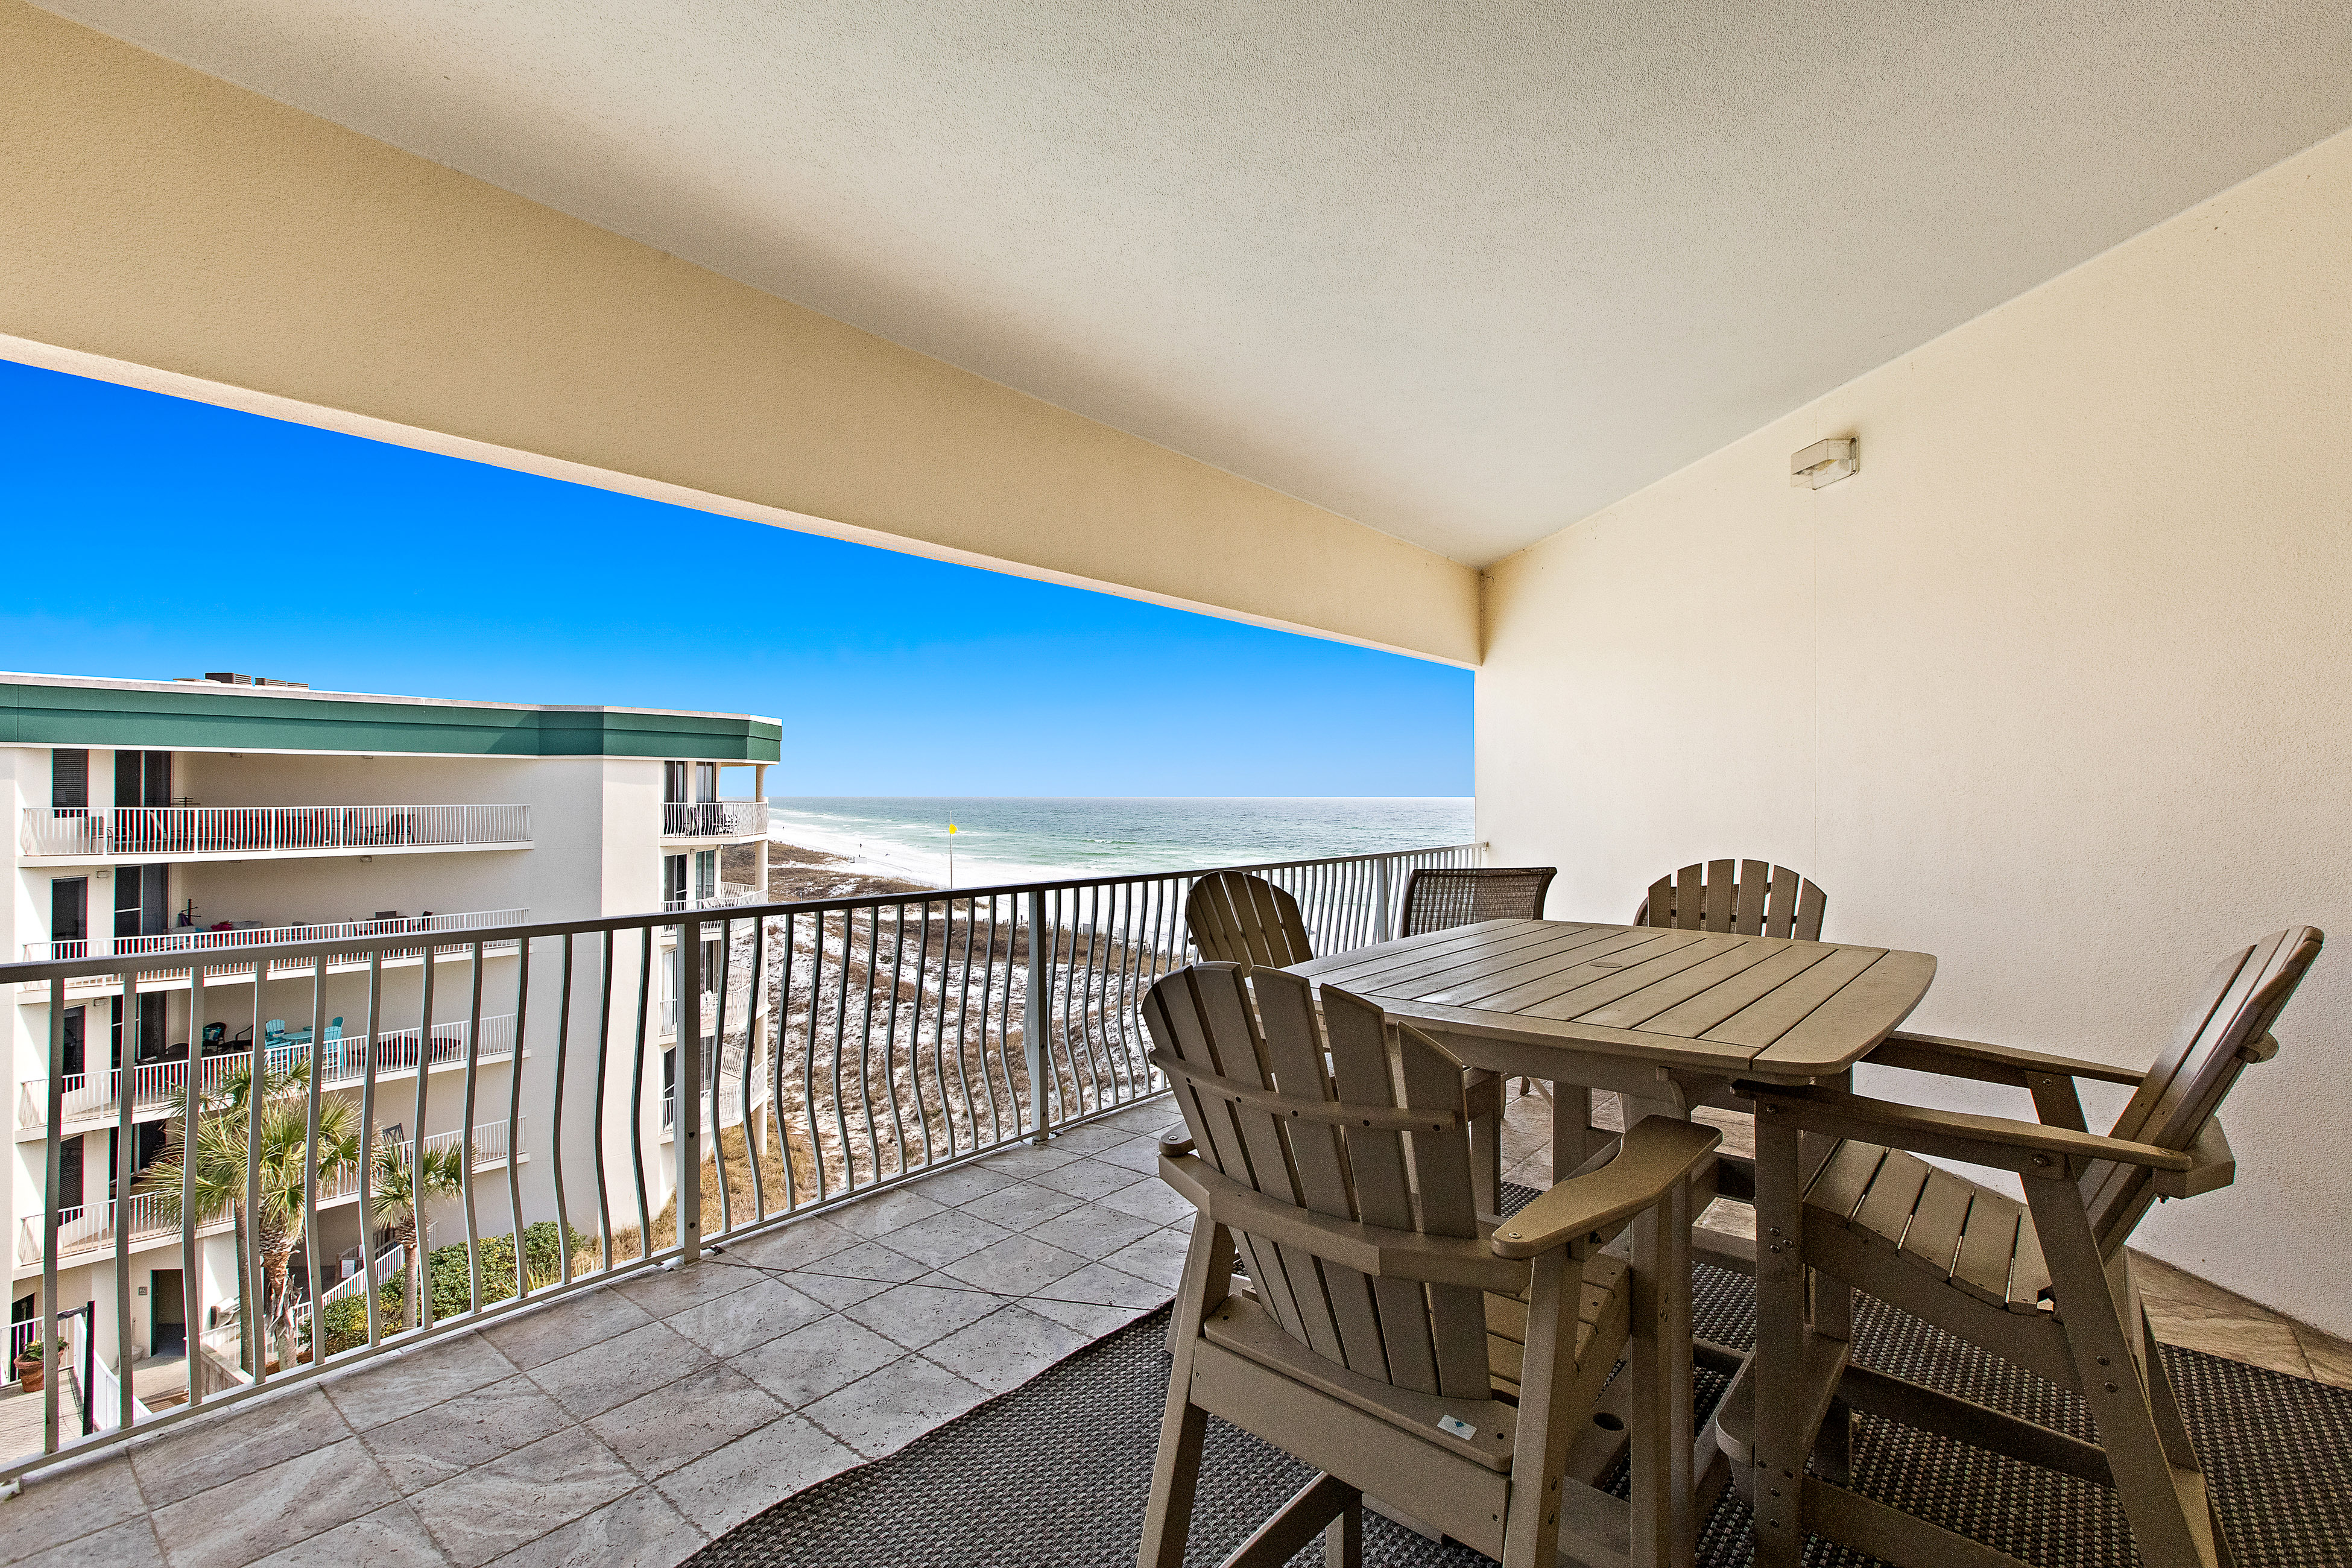 Dunes of Seagrove B404 Condo rental in Dunes of Seagrove in Highway 30-A Florida - #17